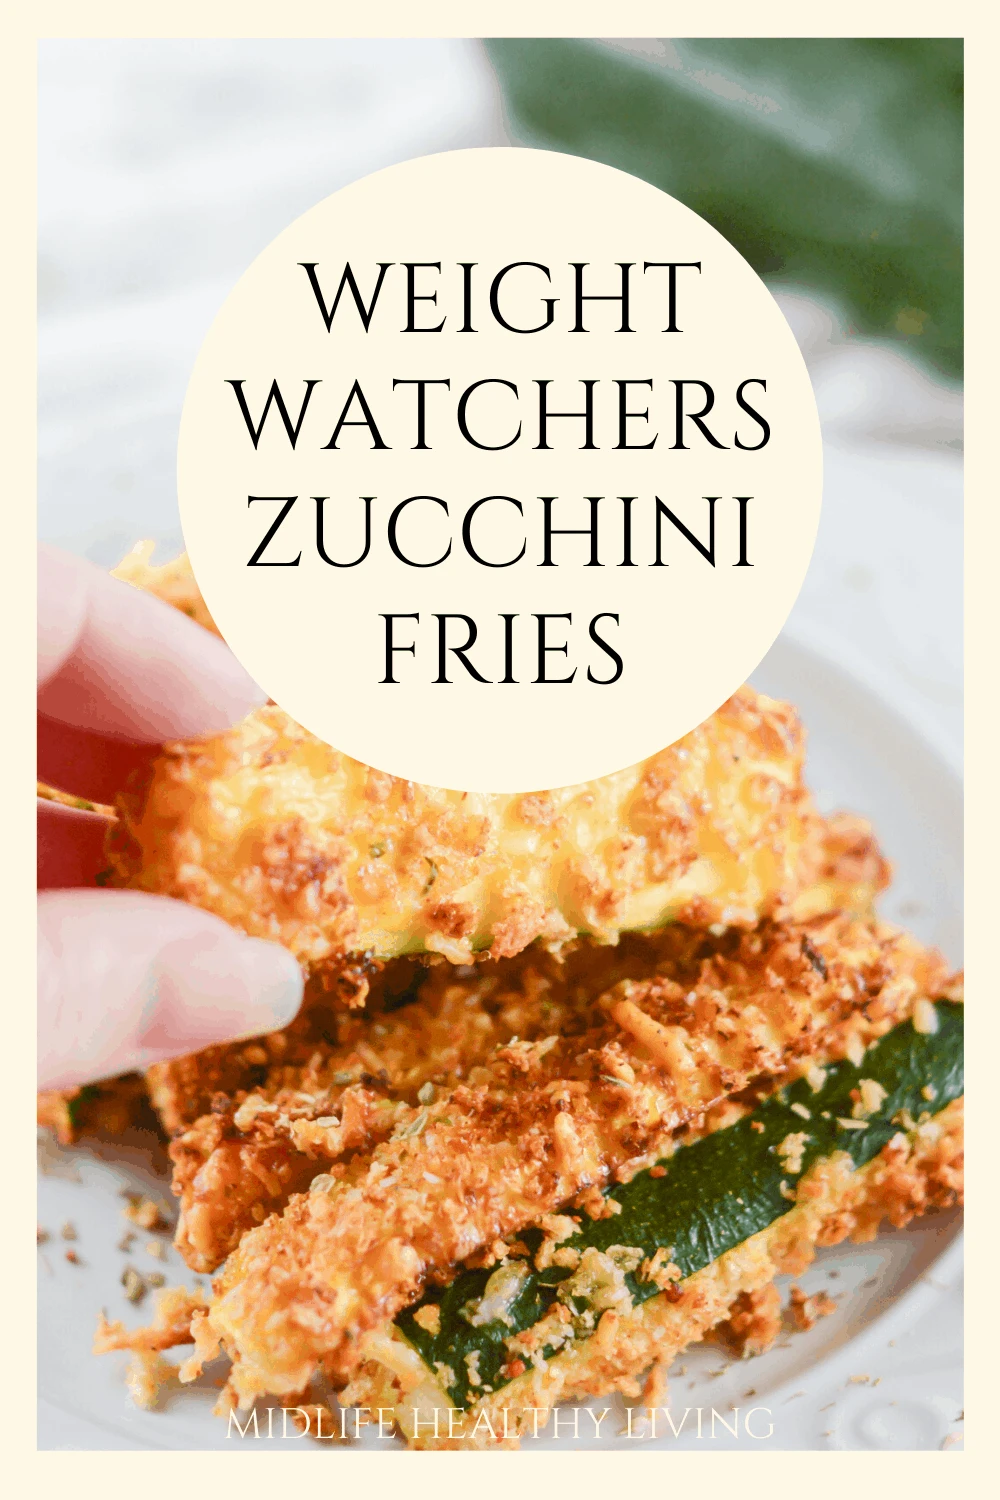 Weight Watchers zucchini fries recipe finished and ready to be shared, showing pin with title in the middle. 